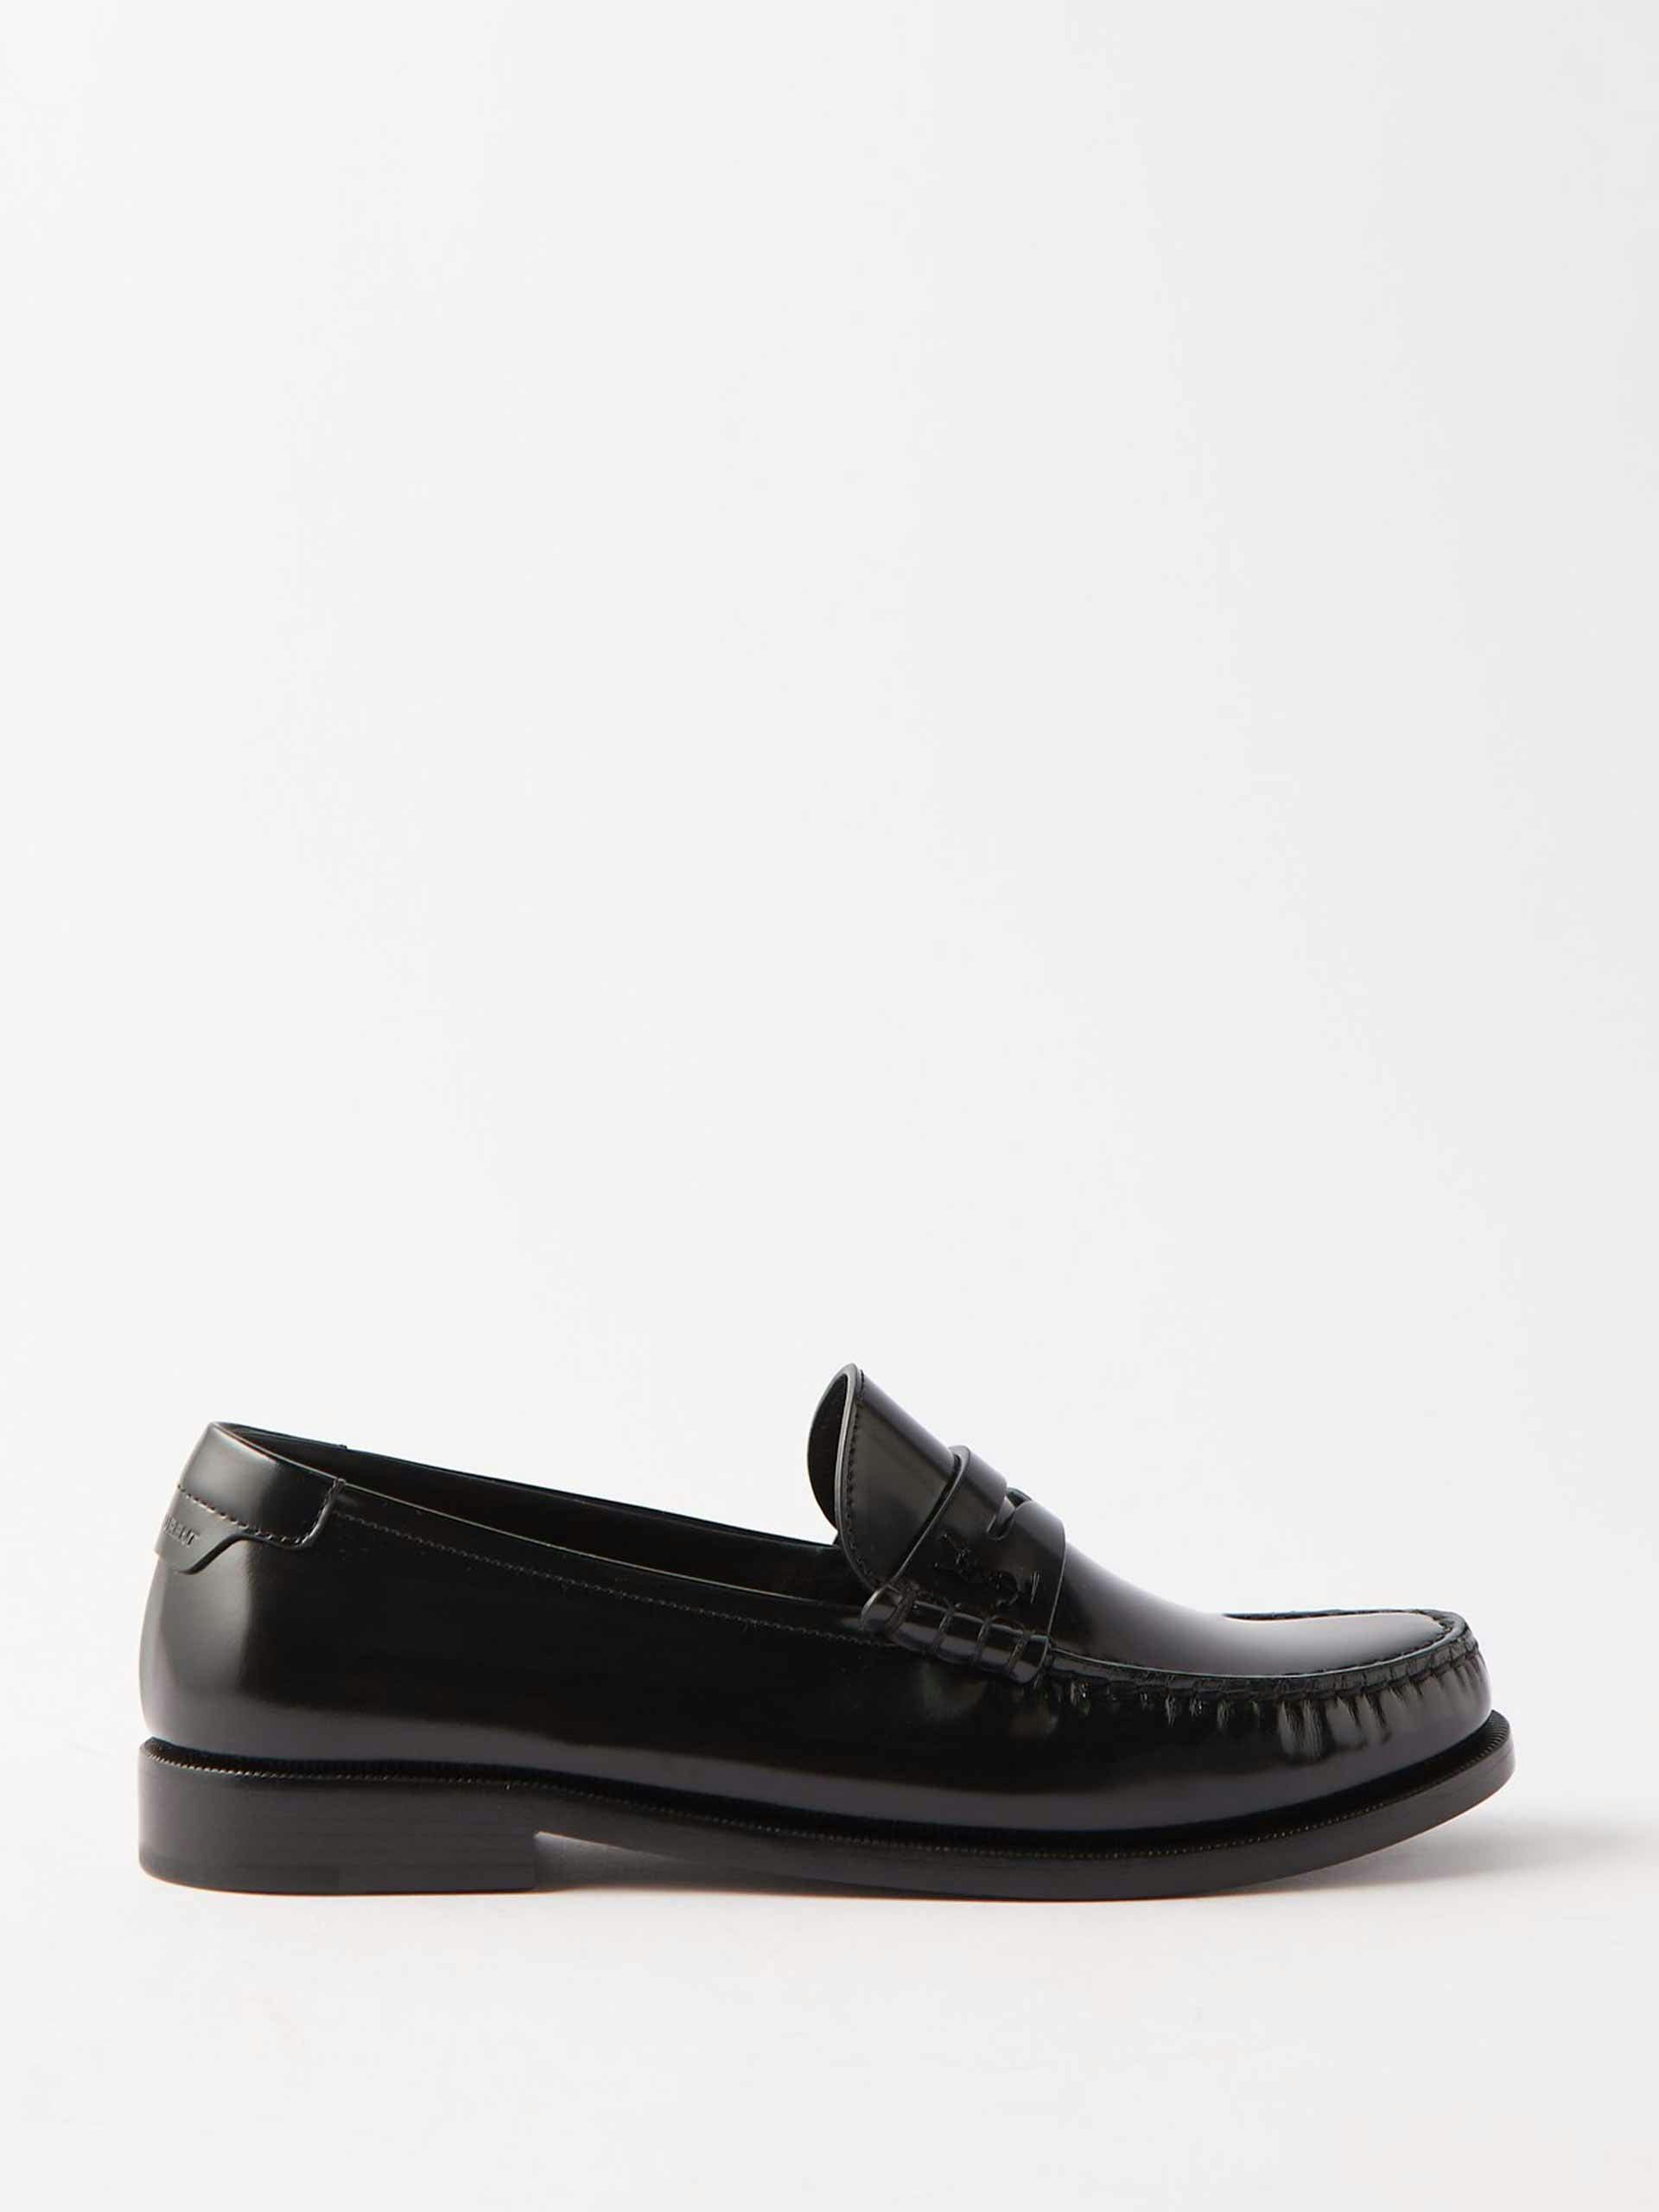 Black penny loafers